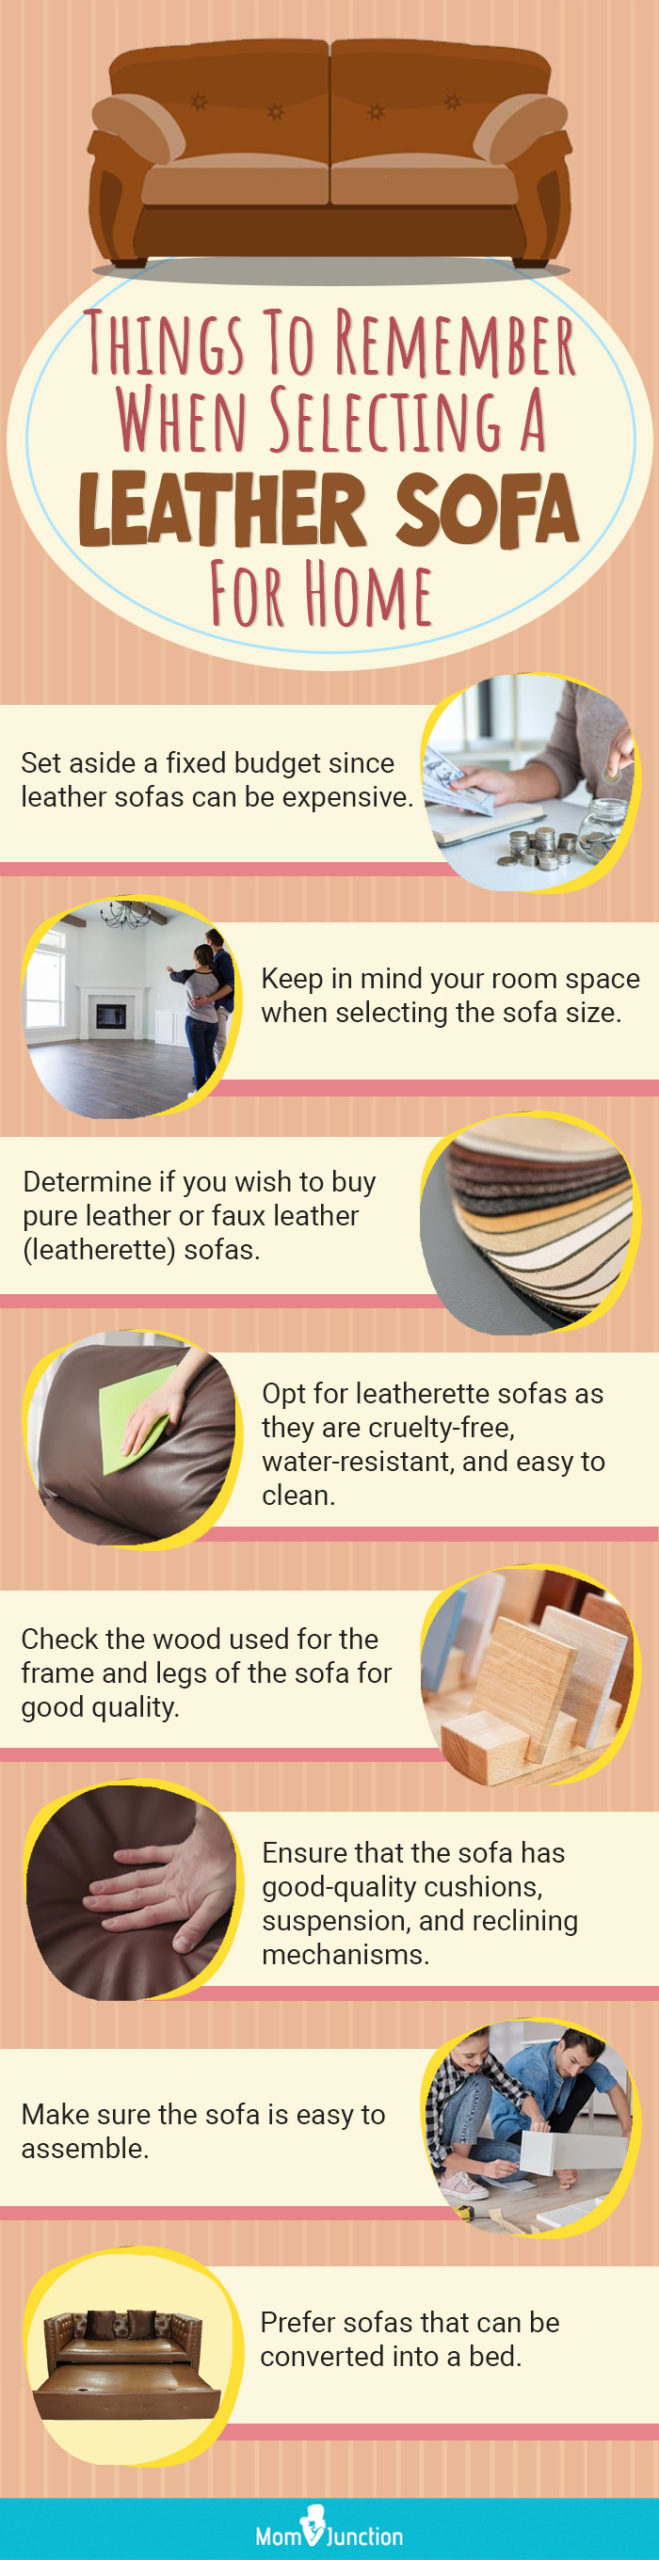 Things To Remember When Selecting A Leather Sofa For Home (infographic)